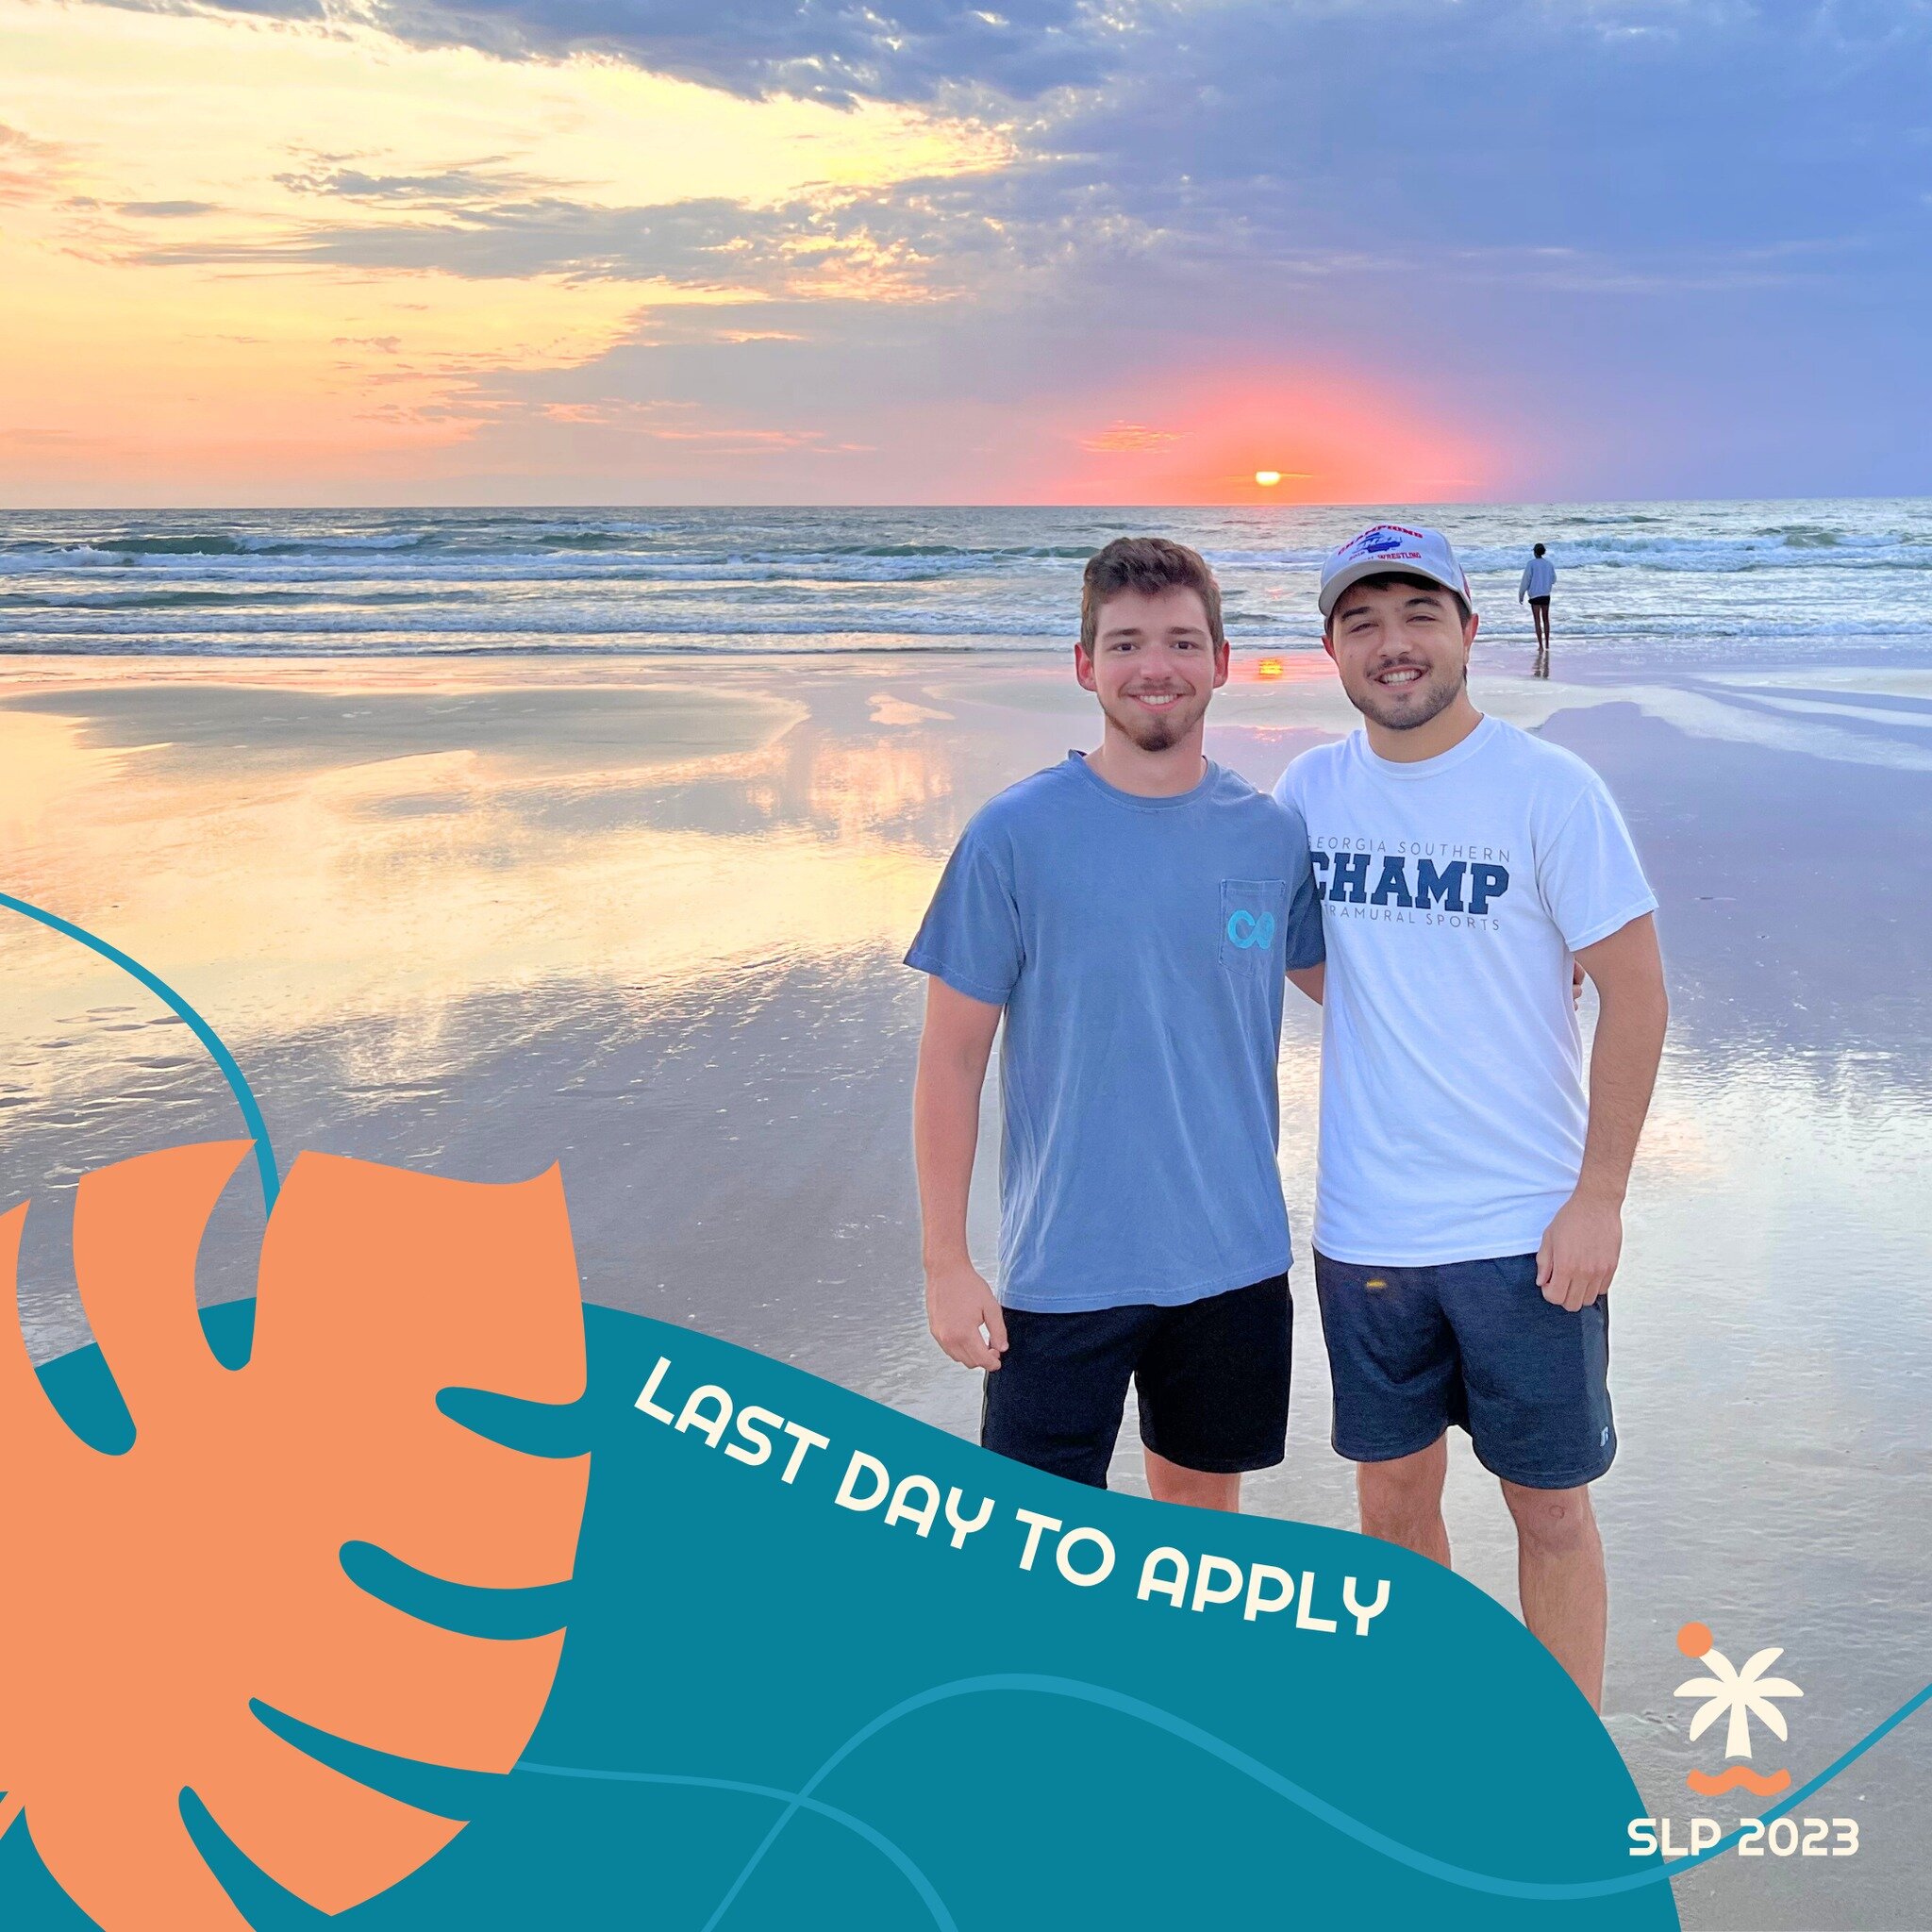 TODAY IS THE DAY 🌴 Don't miss out on the summer of a lifetime!! Connect, learn, and grow with CO at SLP 2023. Apply by midnight to keep the option open!